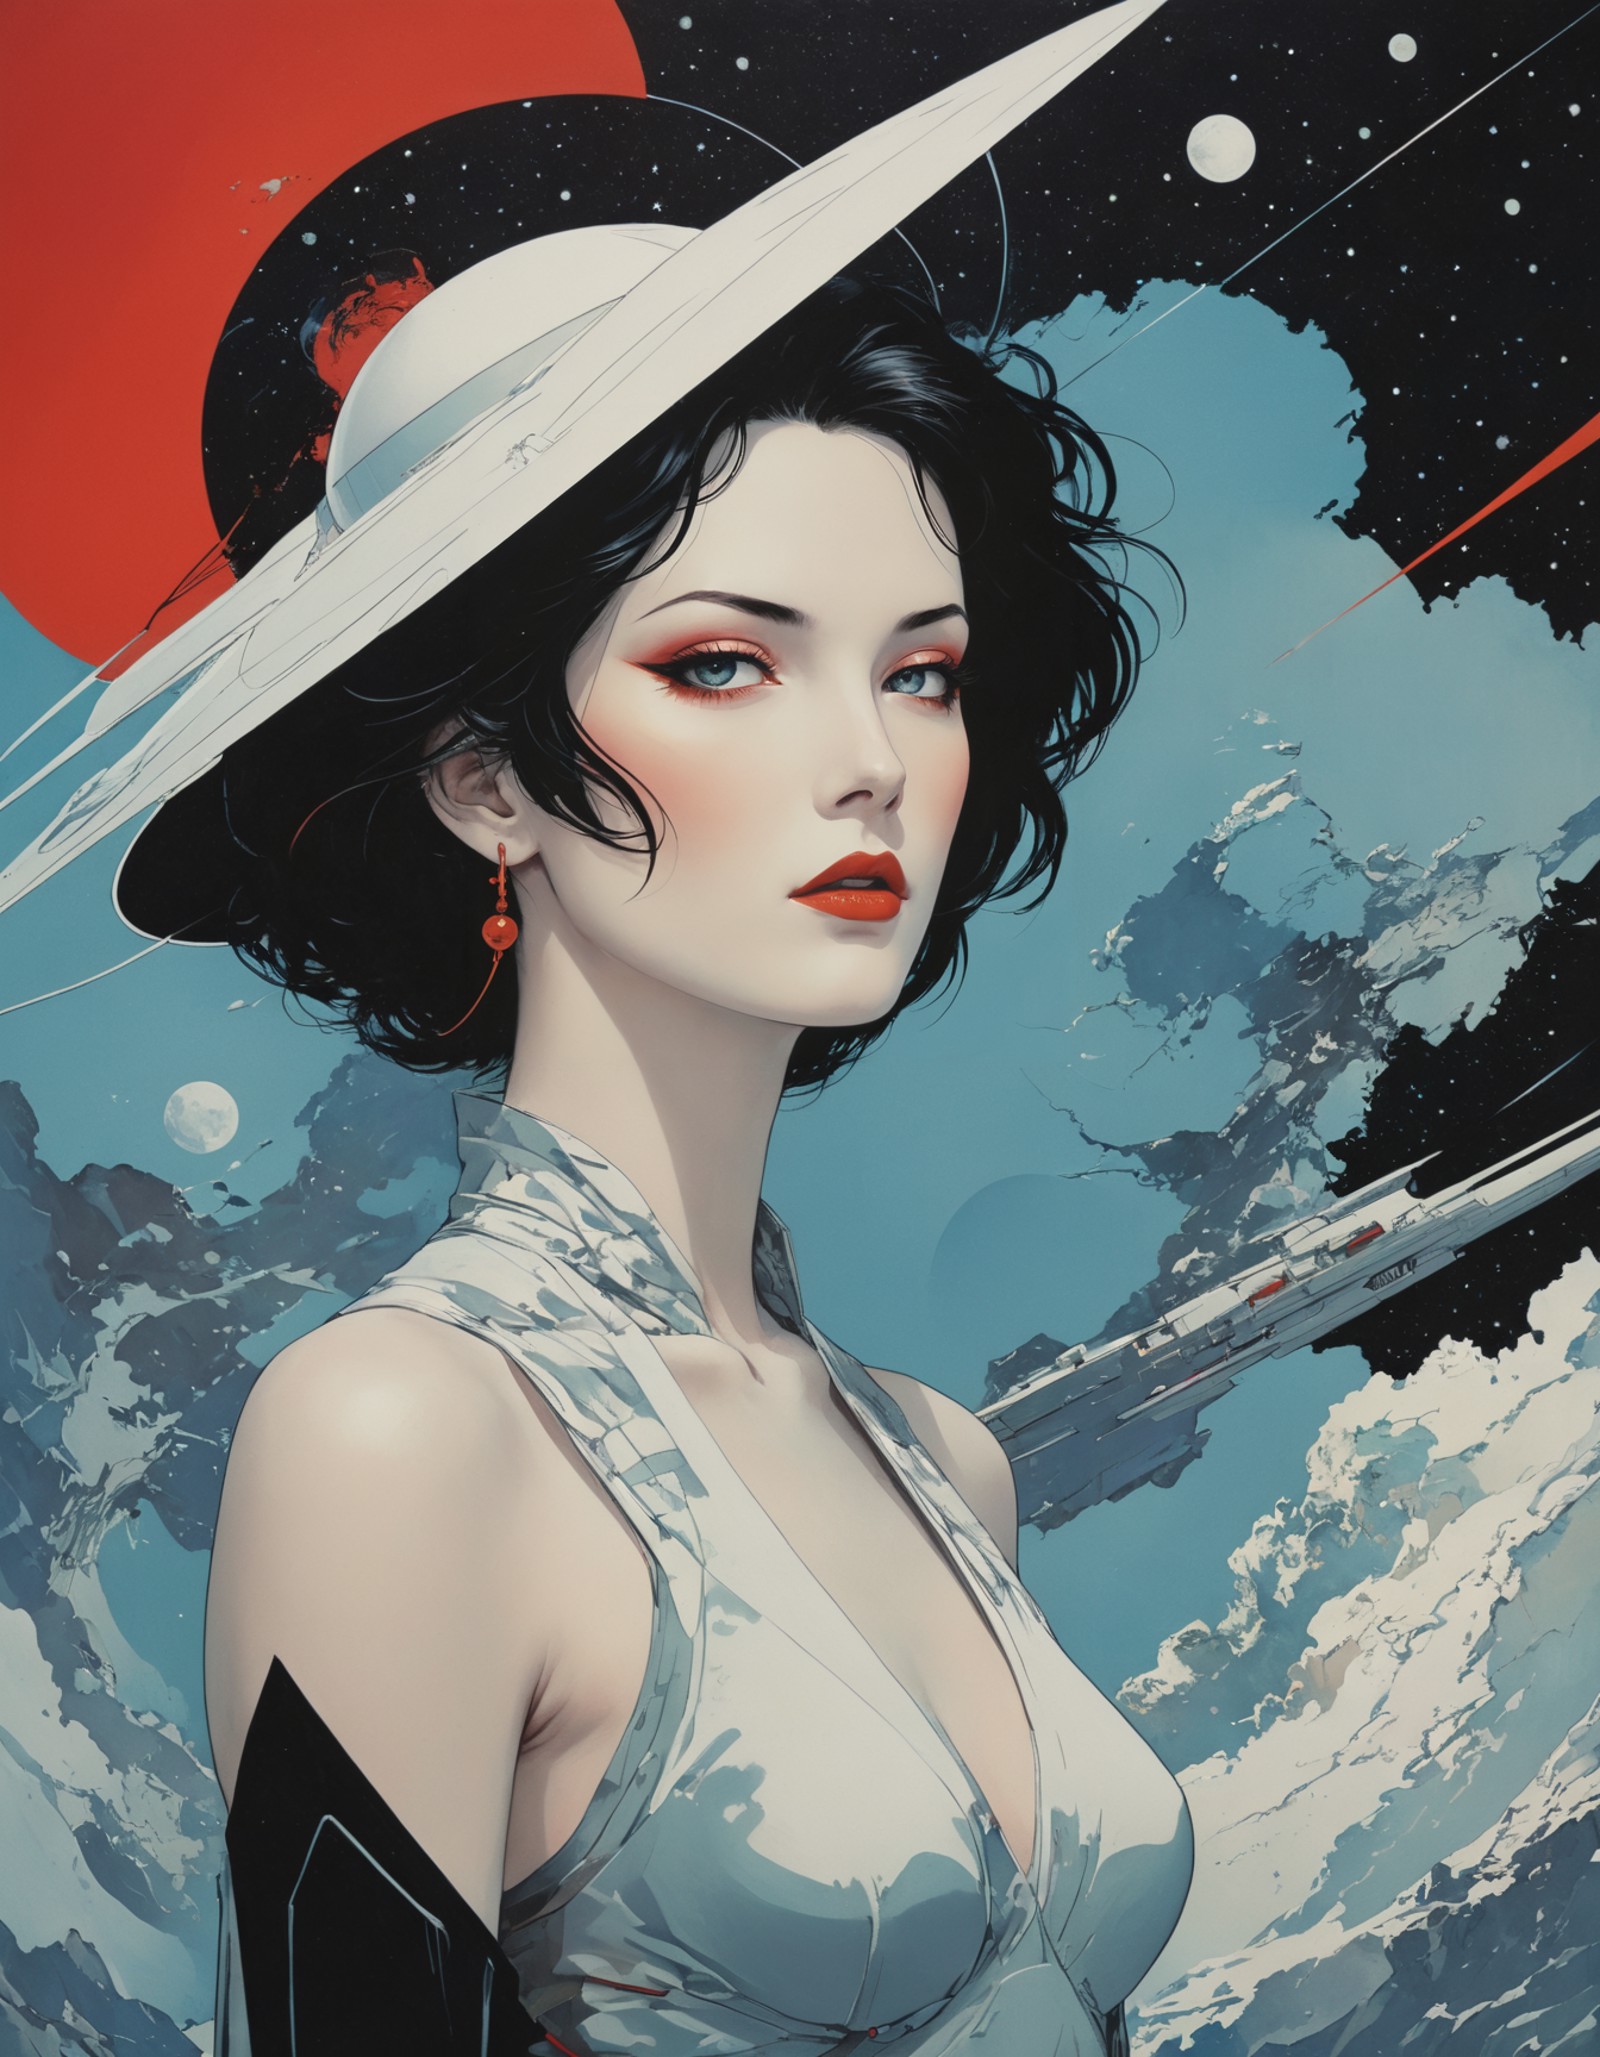 ([by Patrick Nagel|by Kawanabe Kyosai]:1.5), (In a daring odyssey through cosmic gateways, defies the limits of space trav...